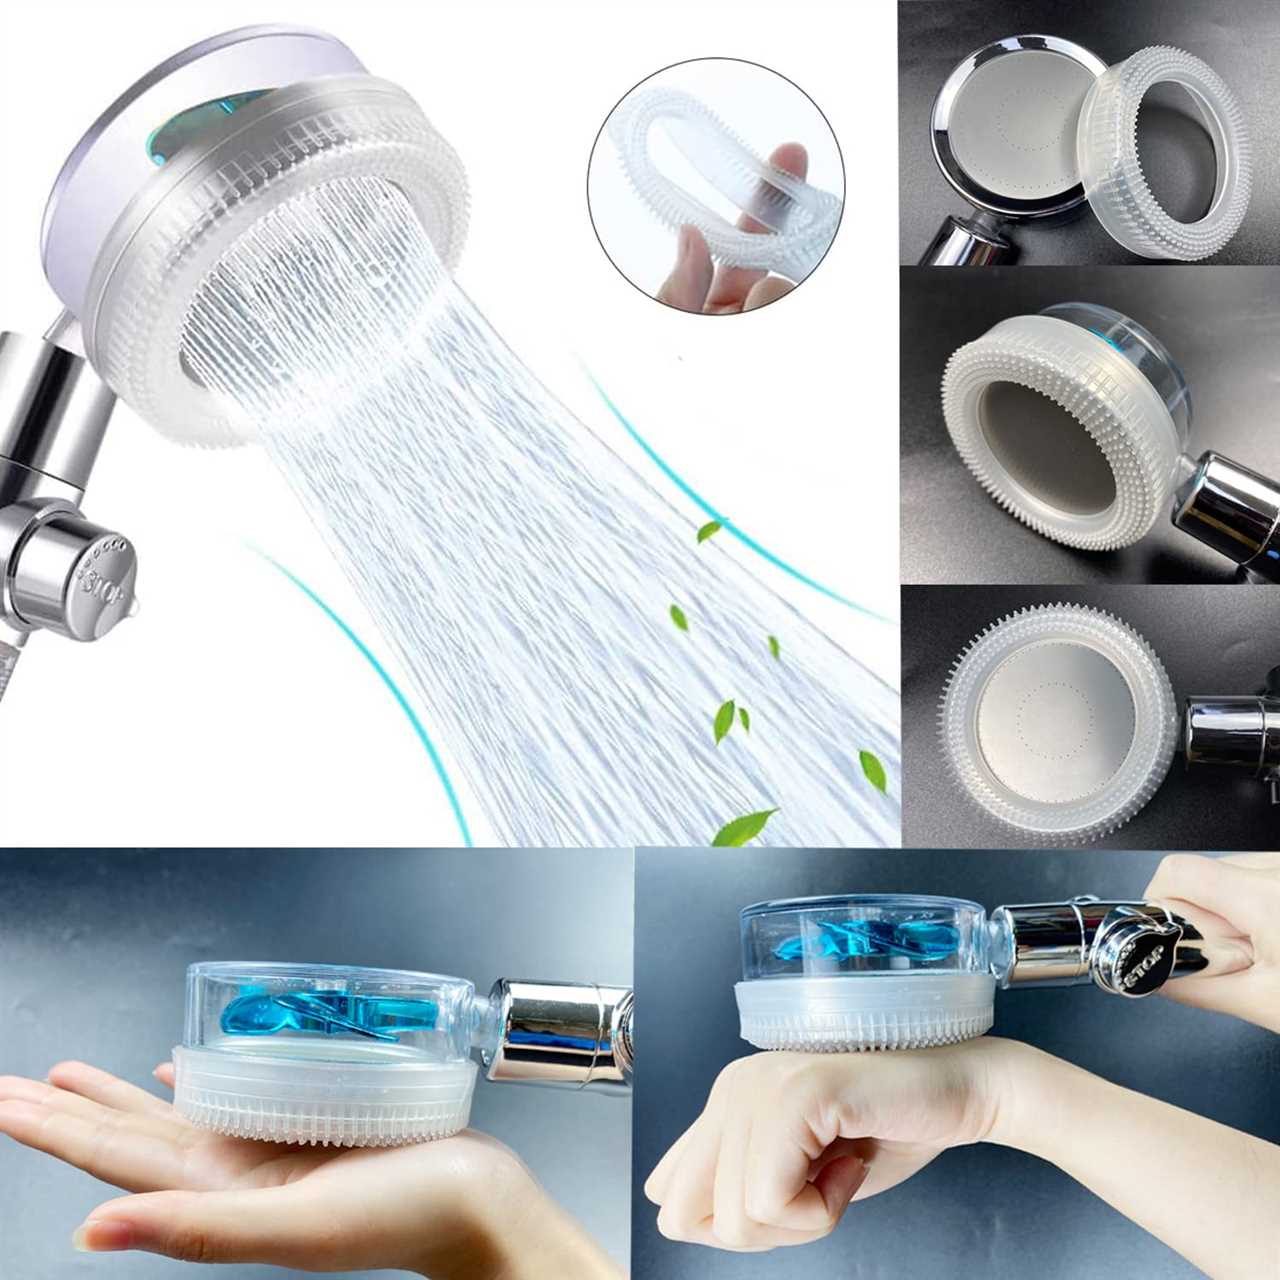 Get the Best Drivse Shower Head for a Luxurious Shower Experience